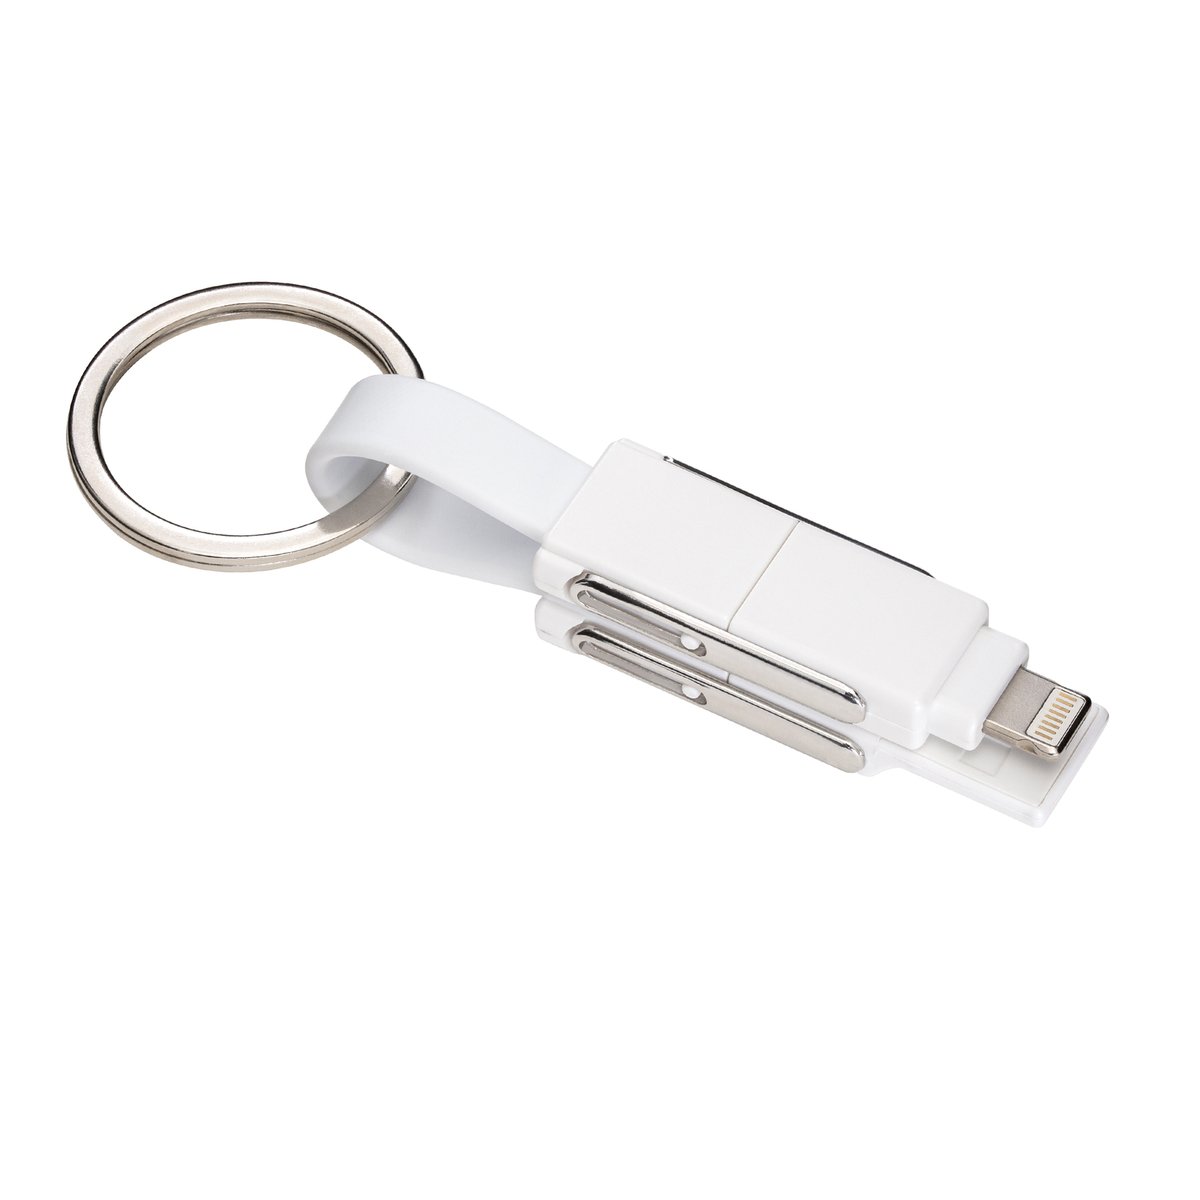 6-in-1 Charging Cable REEVES-MIXCO III white